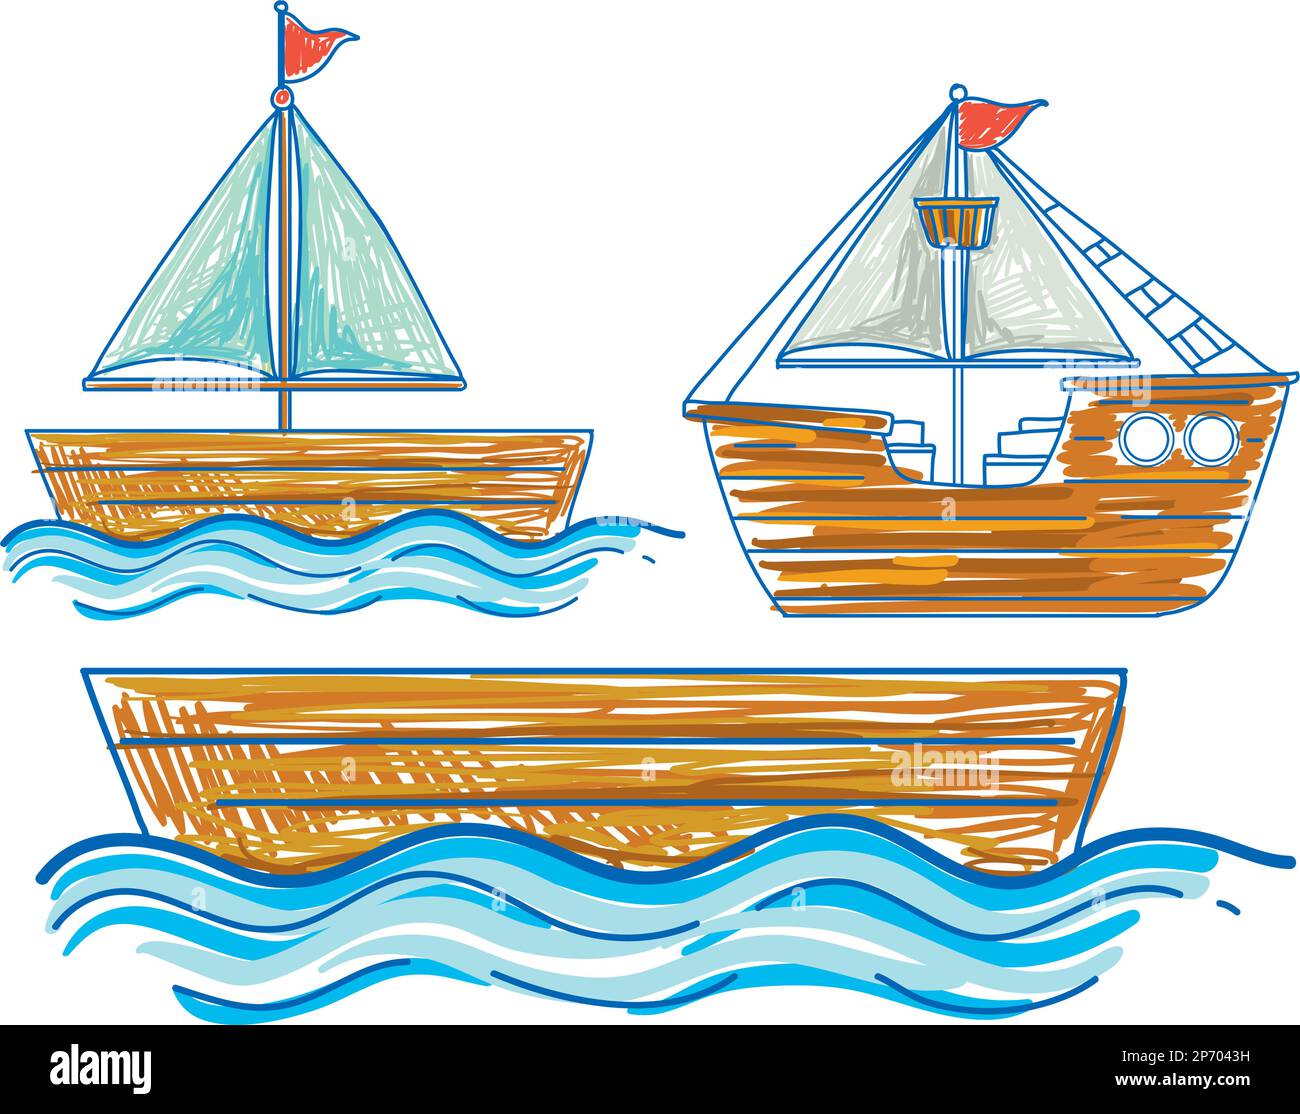 Small boats Cut Out Stock Images & Pictures - Alamy